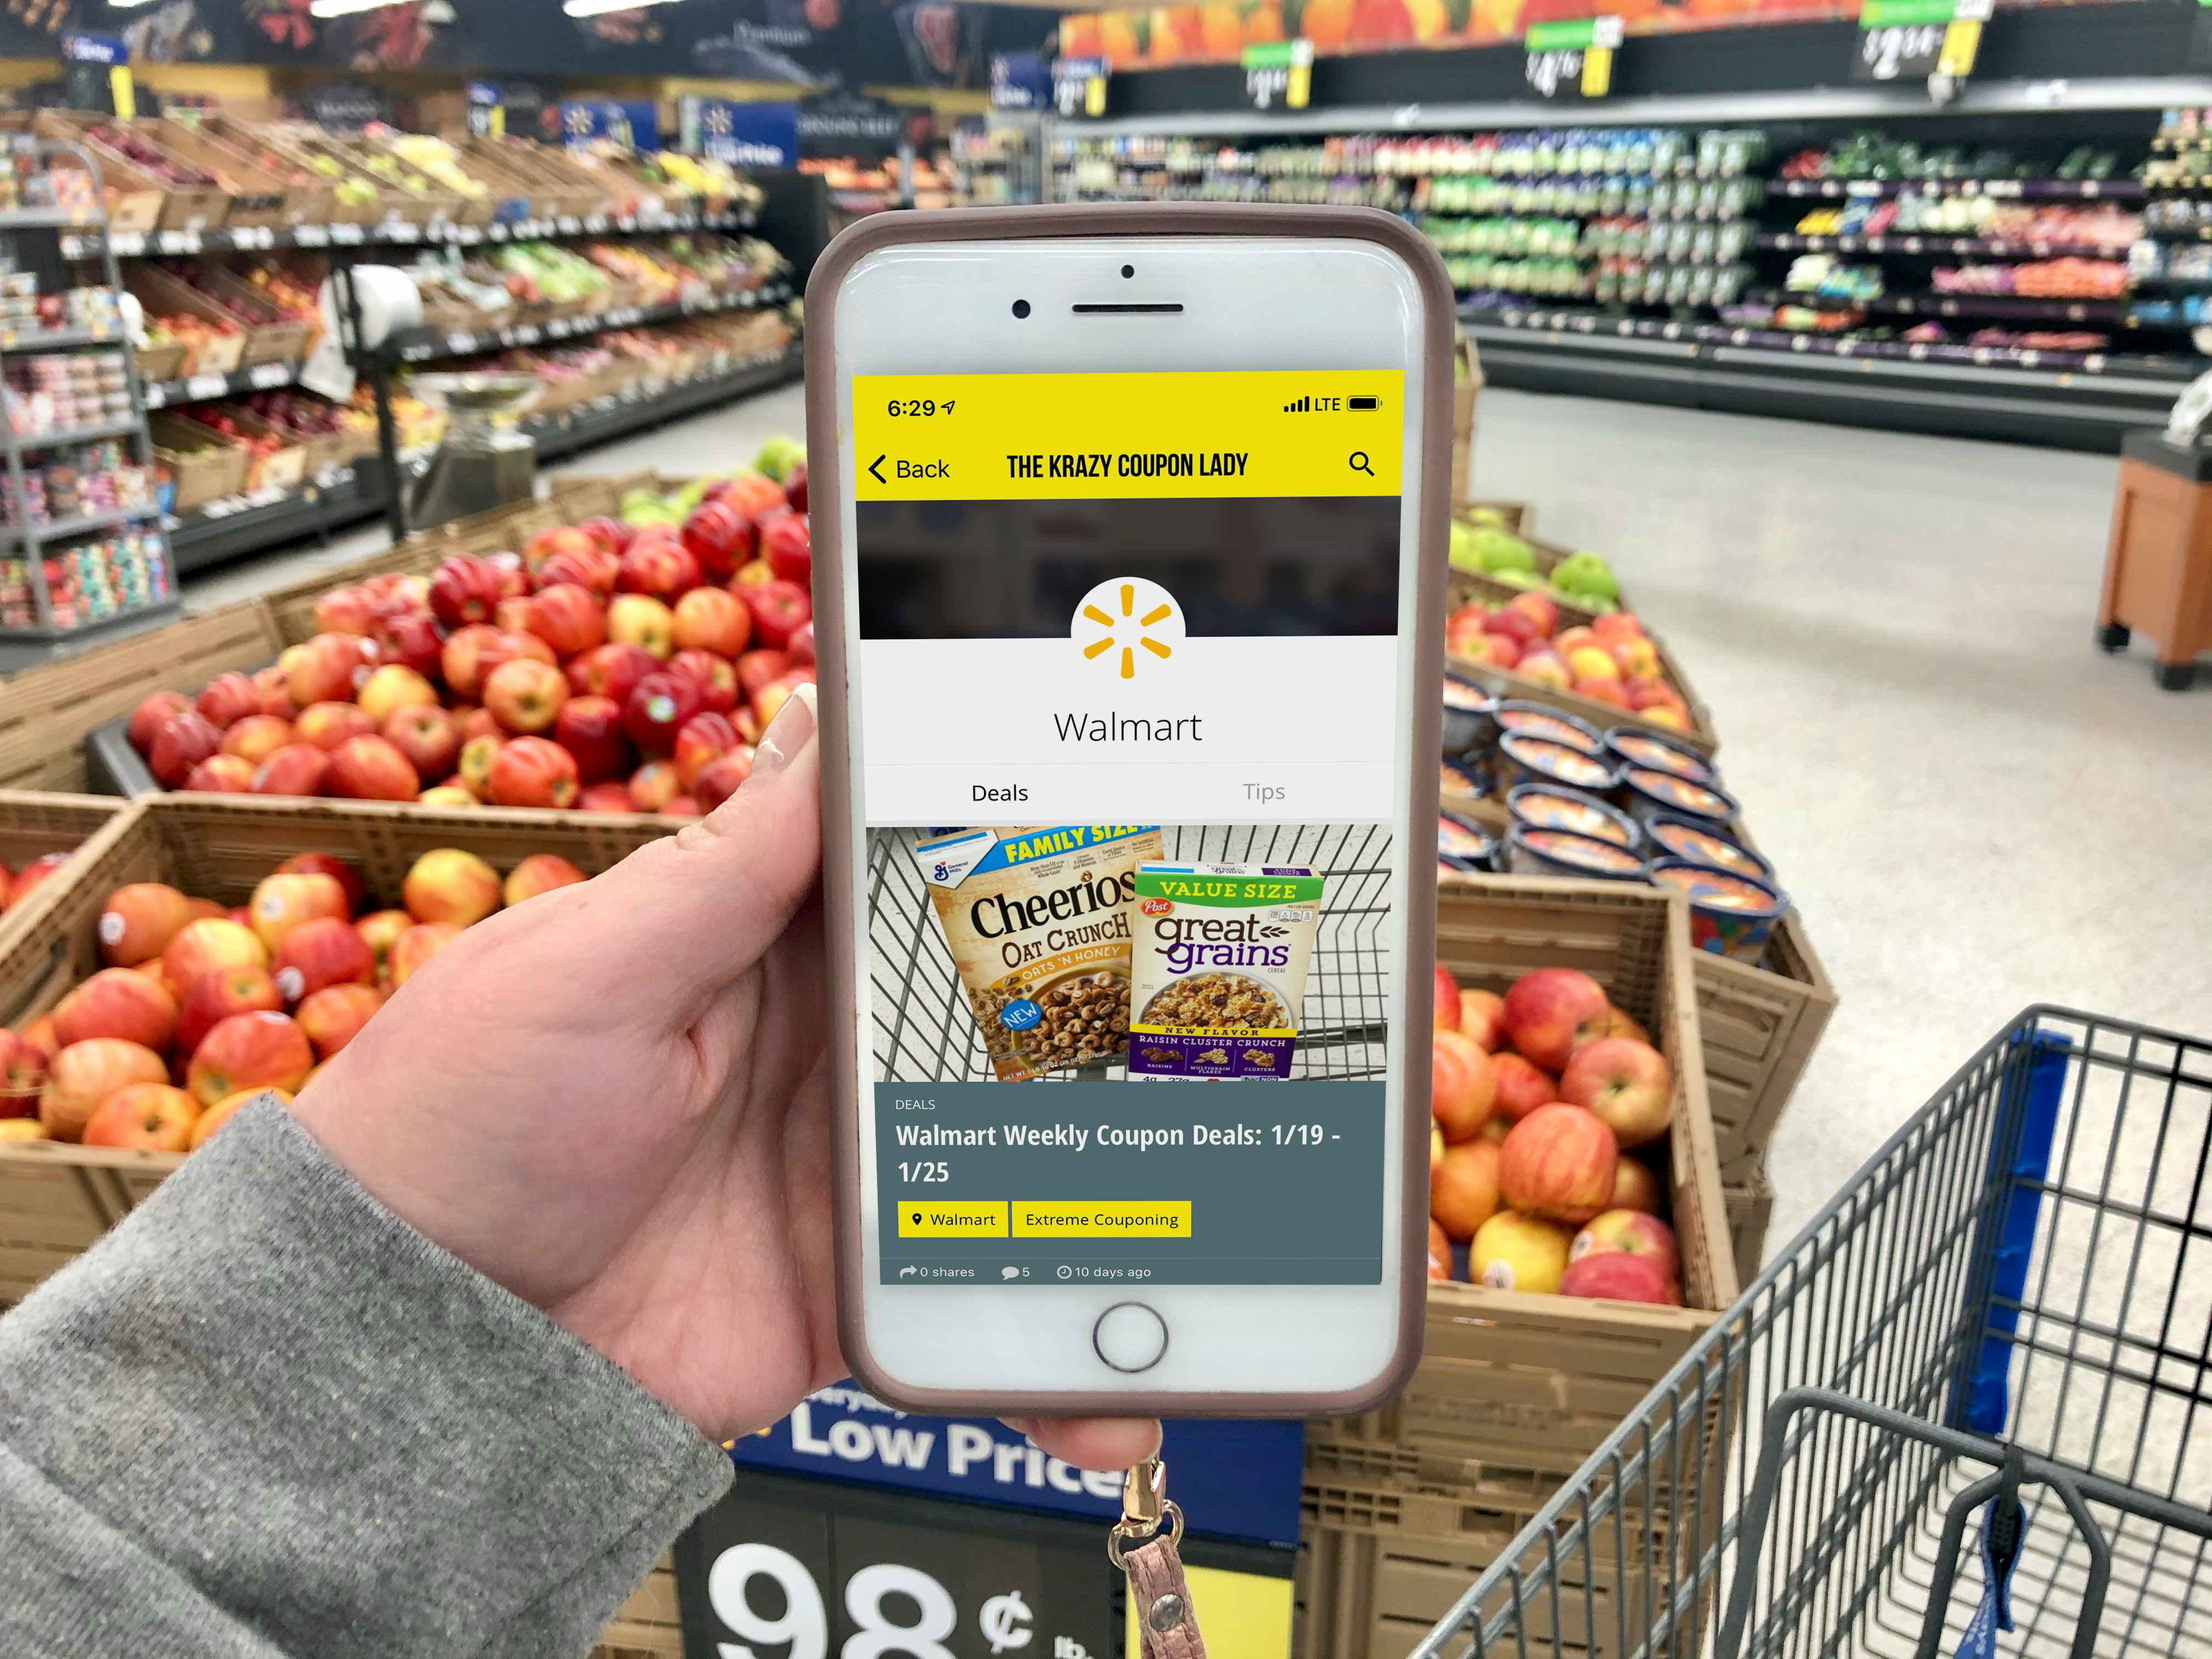 The Krazy Coupon Lady App in Walmart.